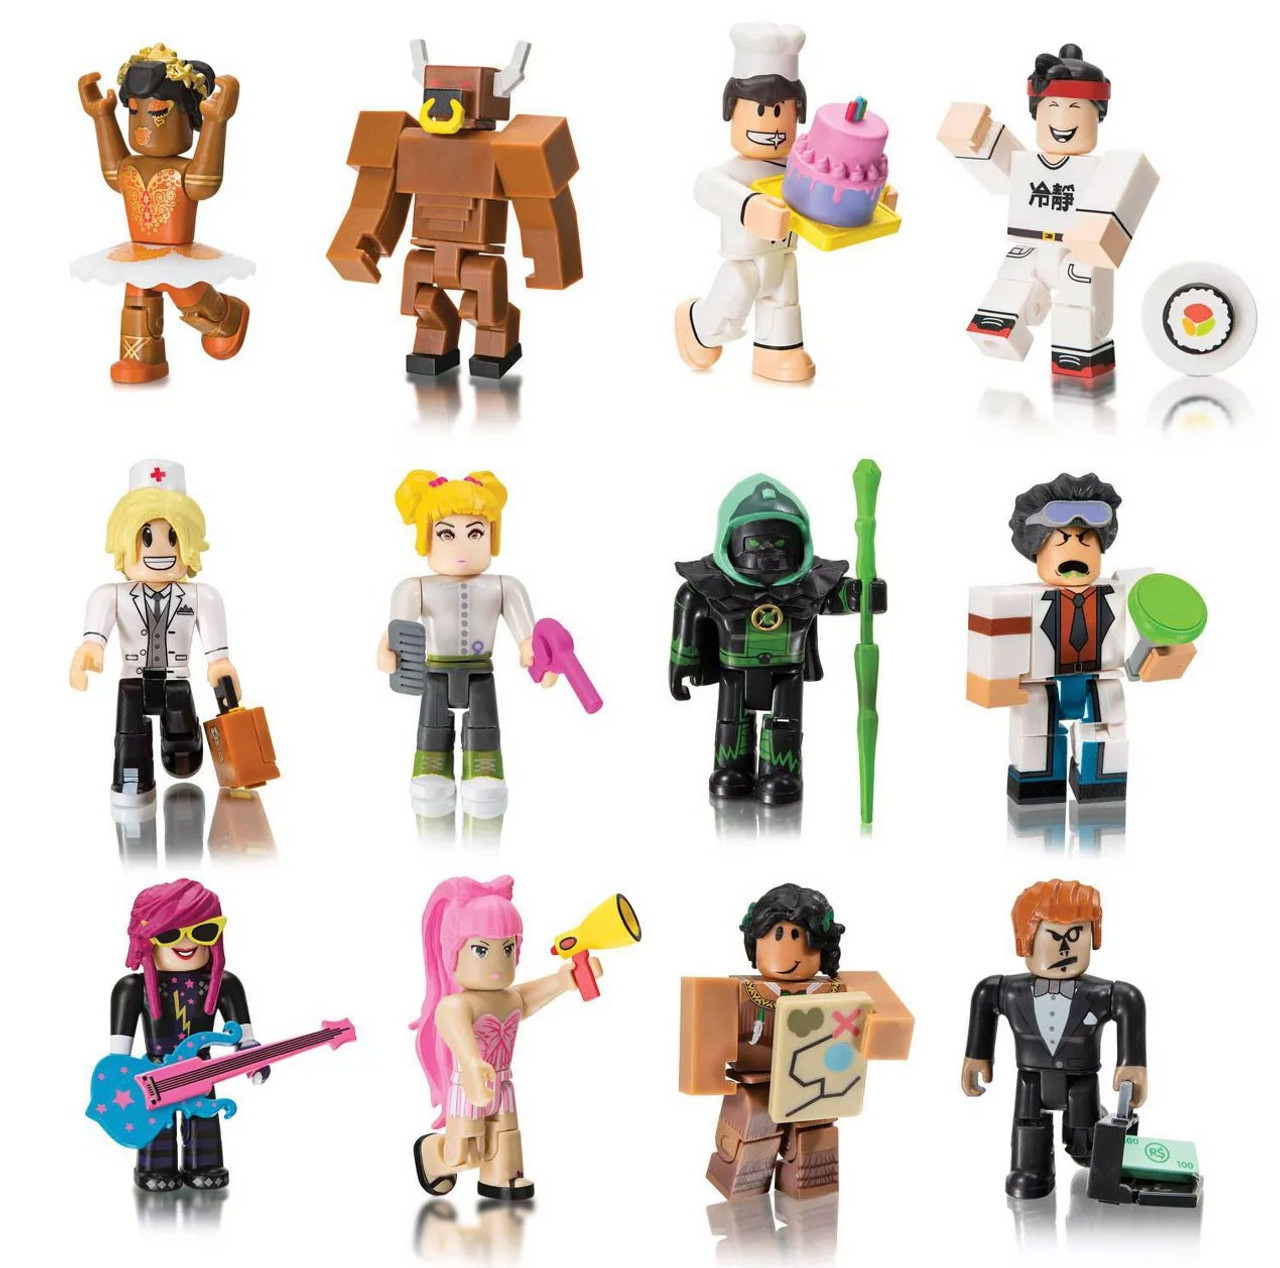 Roblox Toy Collection